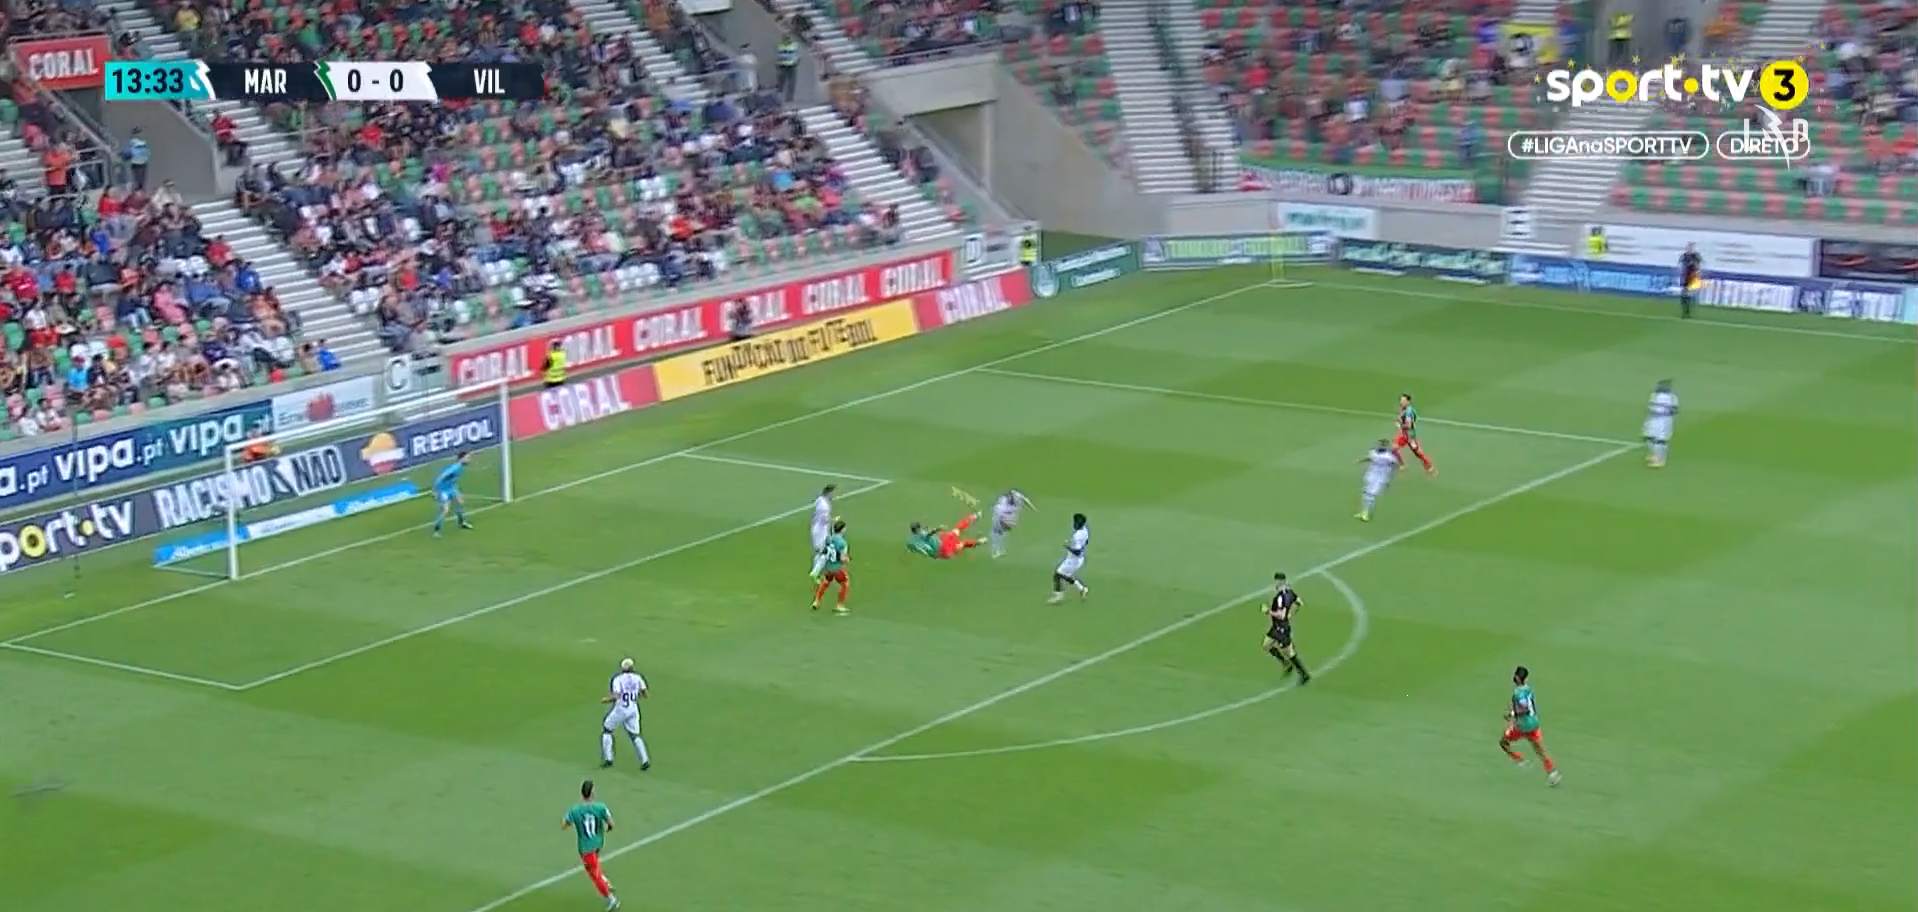 Second League: Platini's acrobatic kick opens the scoring in Funchal (video)